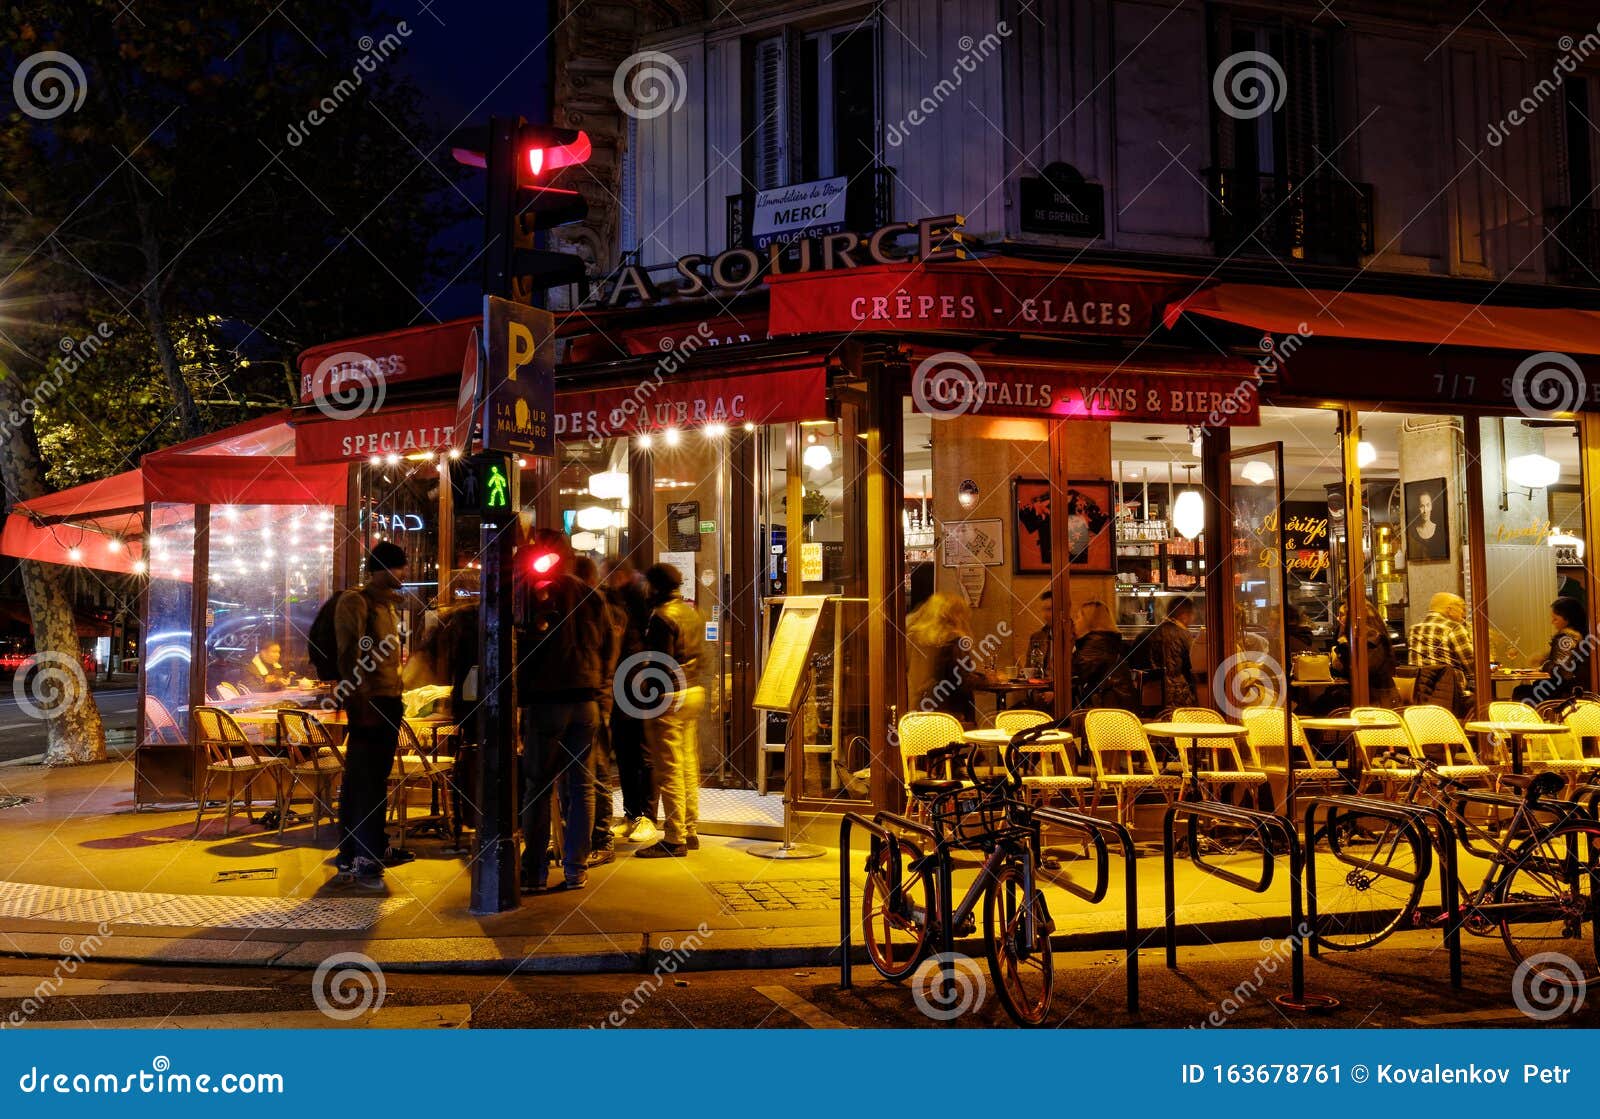 The Traditional French Cafe La Source Located in the 7th District of ...